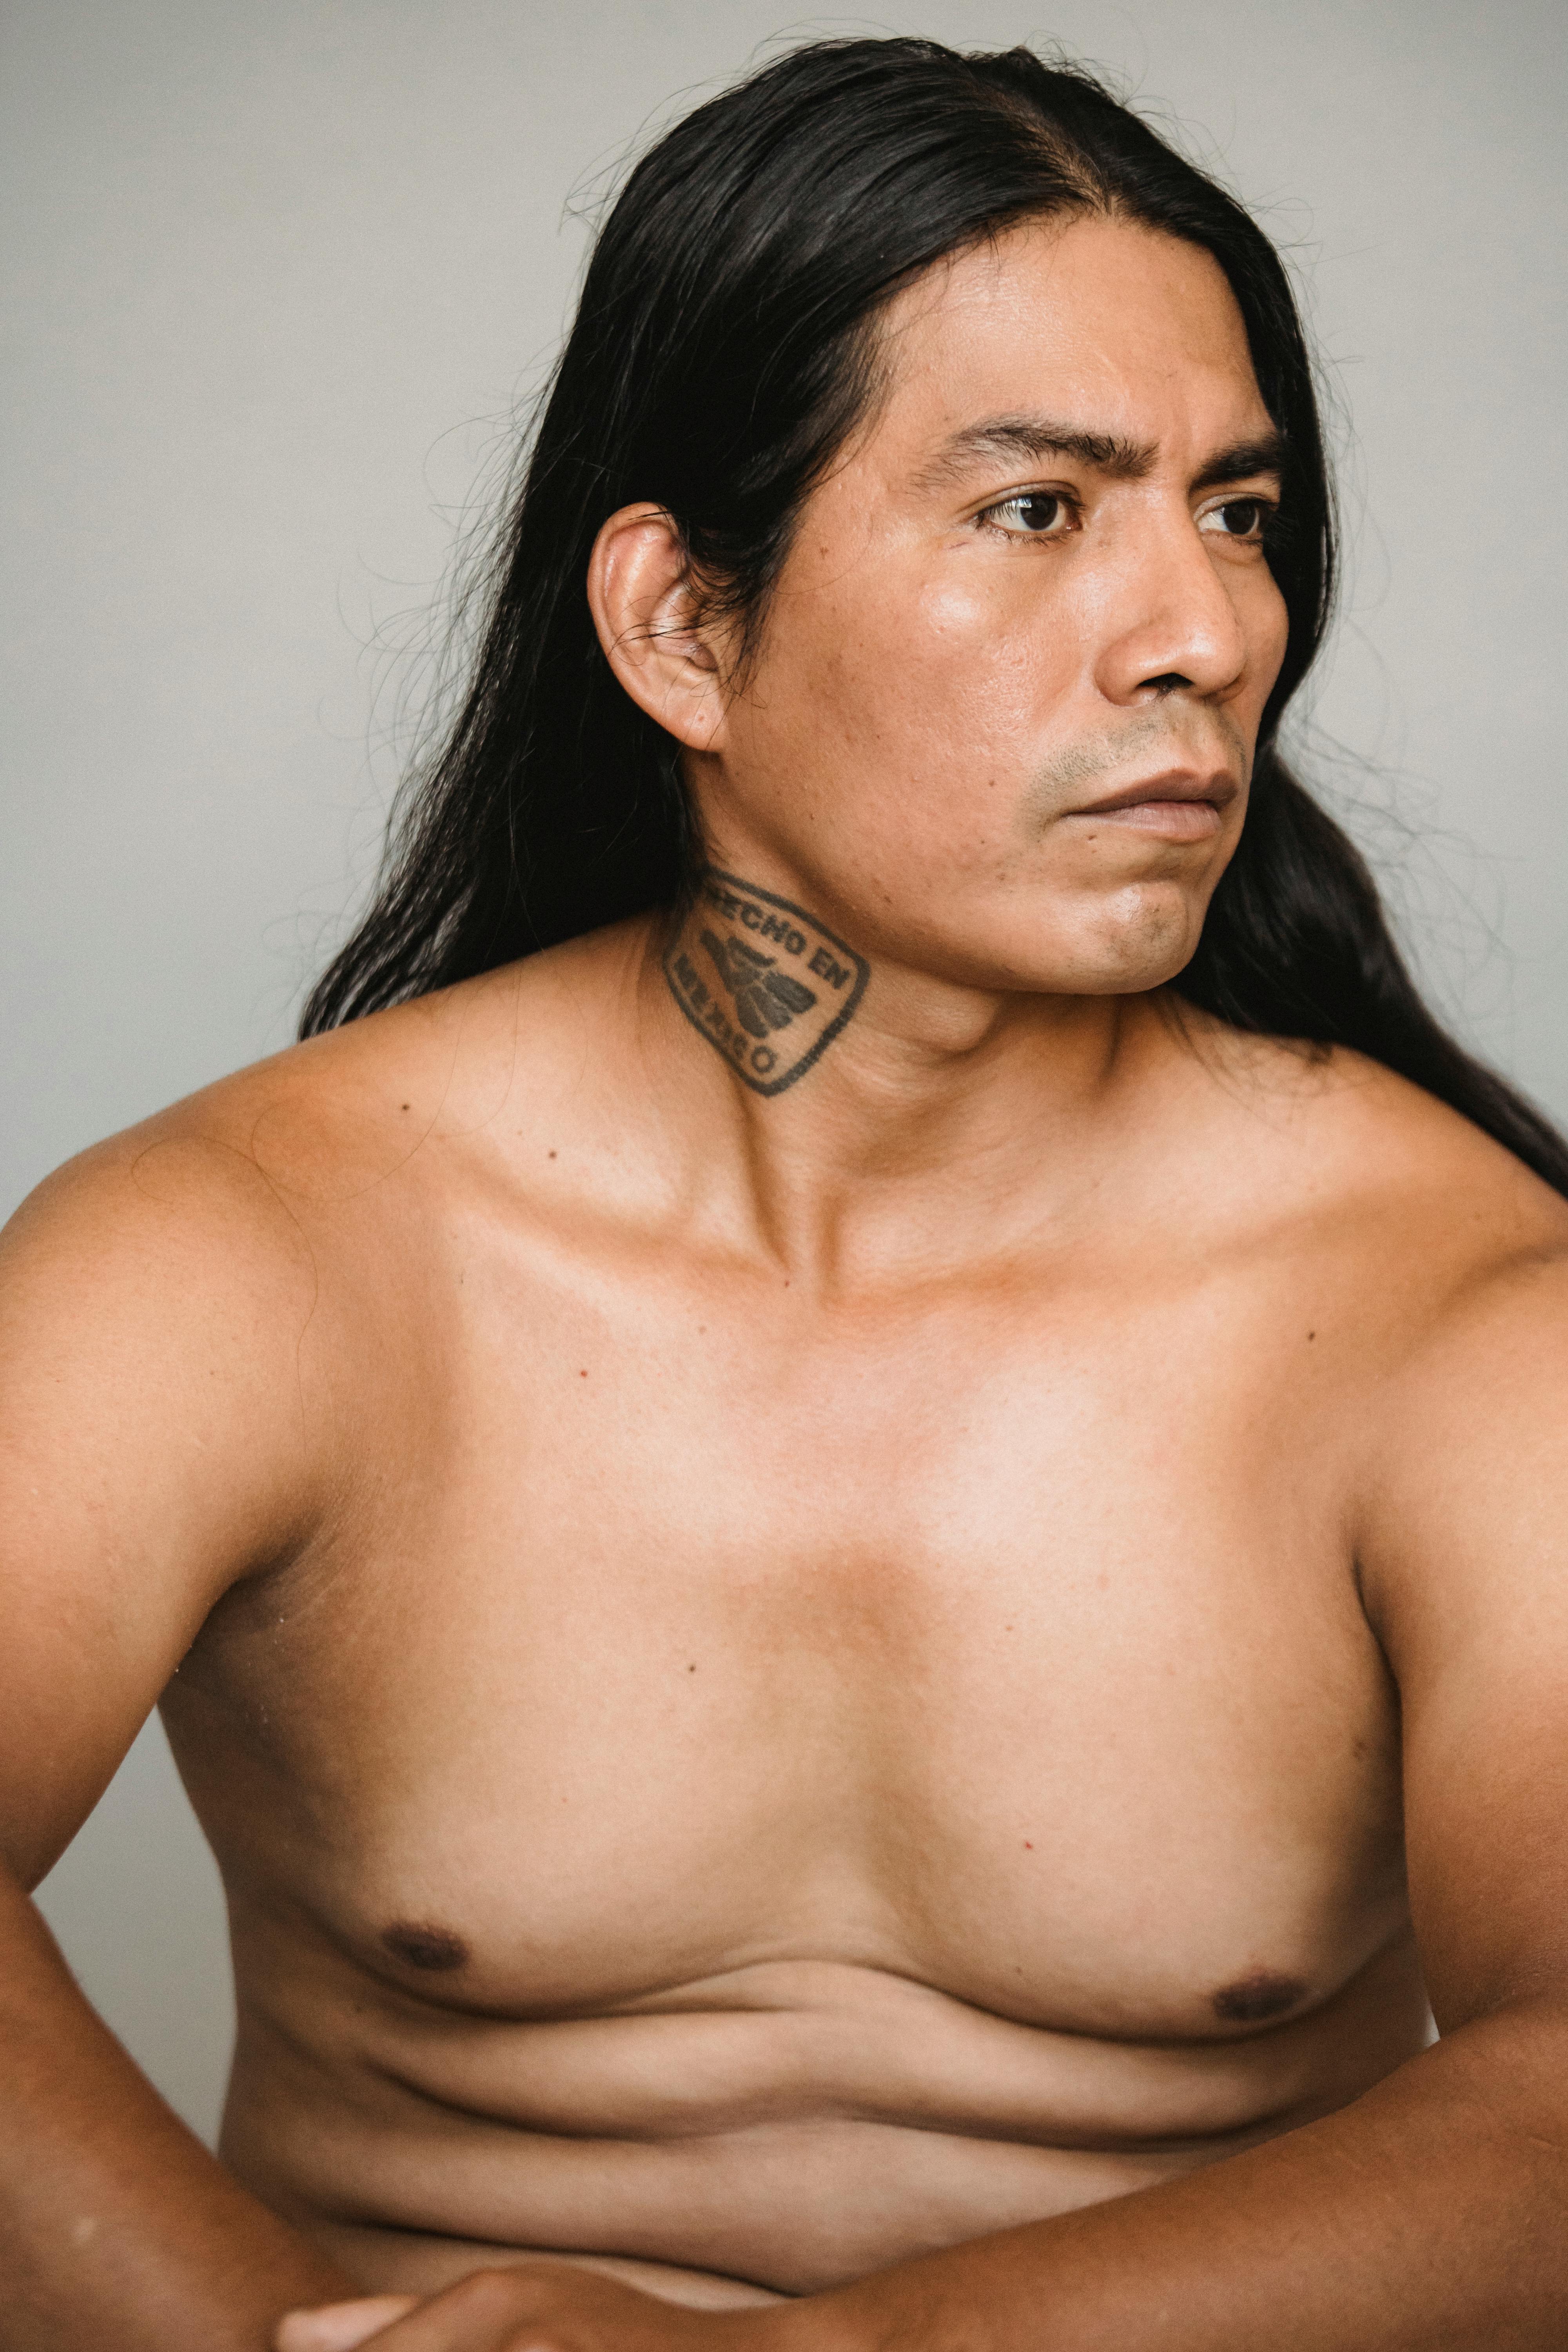 India Join Nude Models - Naked American Indian man with long dark hair Â· Free Stock Photo